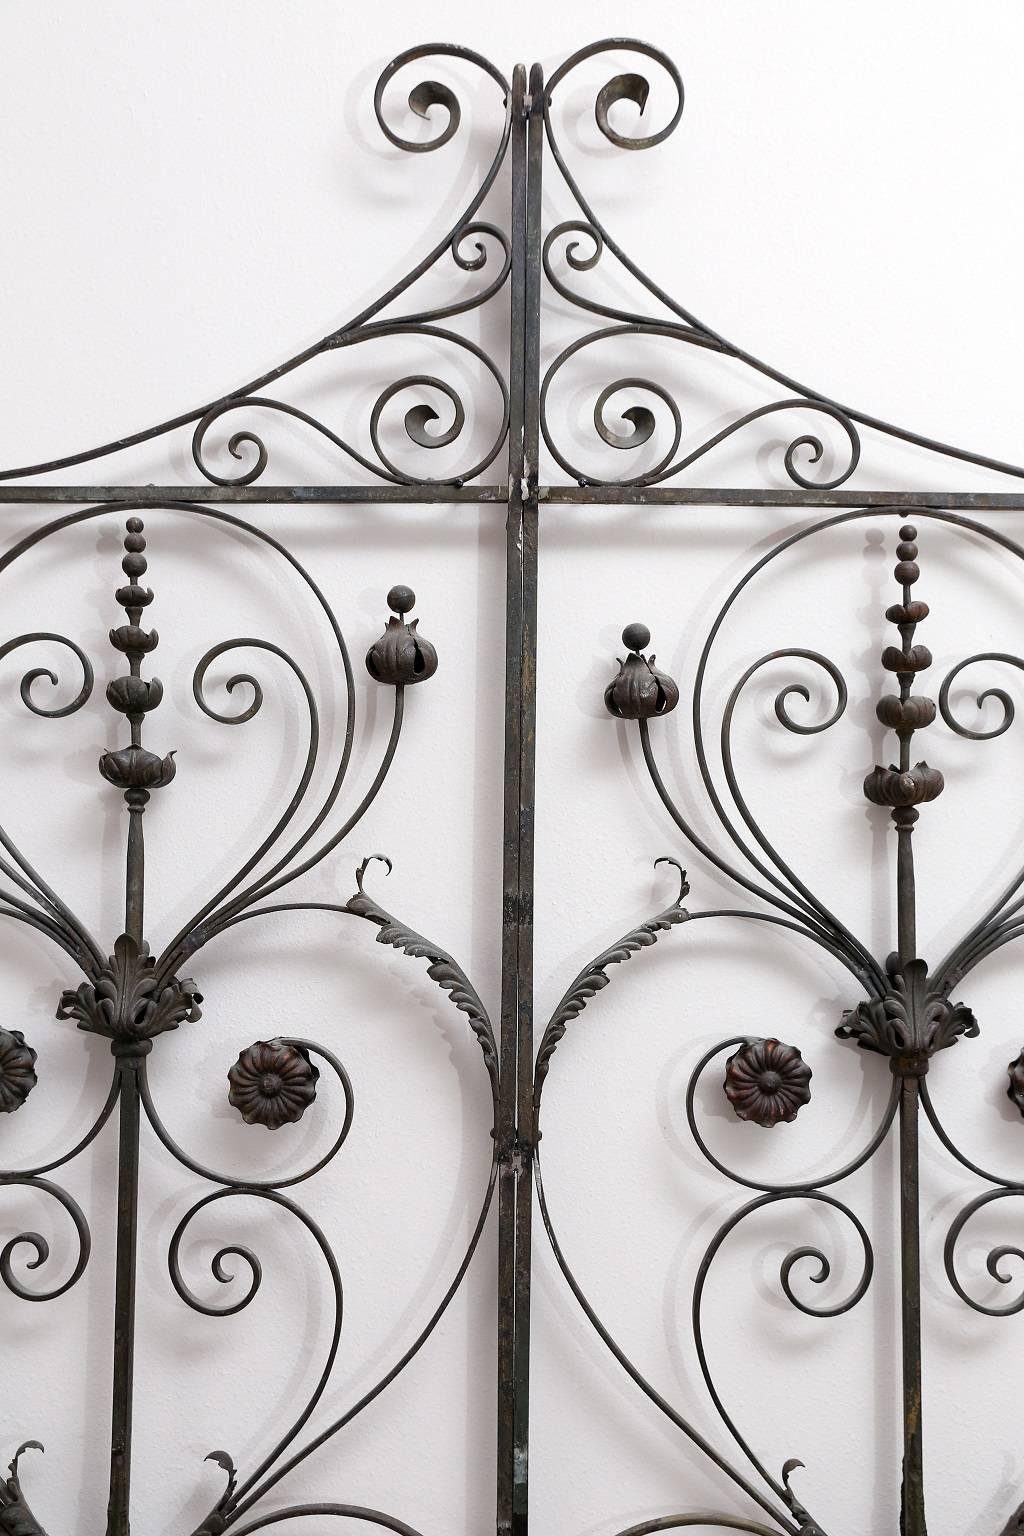 Pair of fine, high quality 19th century wrought iron gates, currently welded together as a queen-sized headboard. Sold together as a headboard, but the gates can be separated and restored as a pair of functional gates.